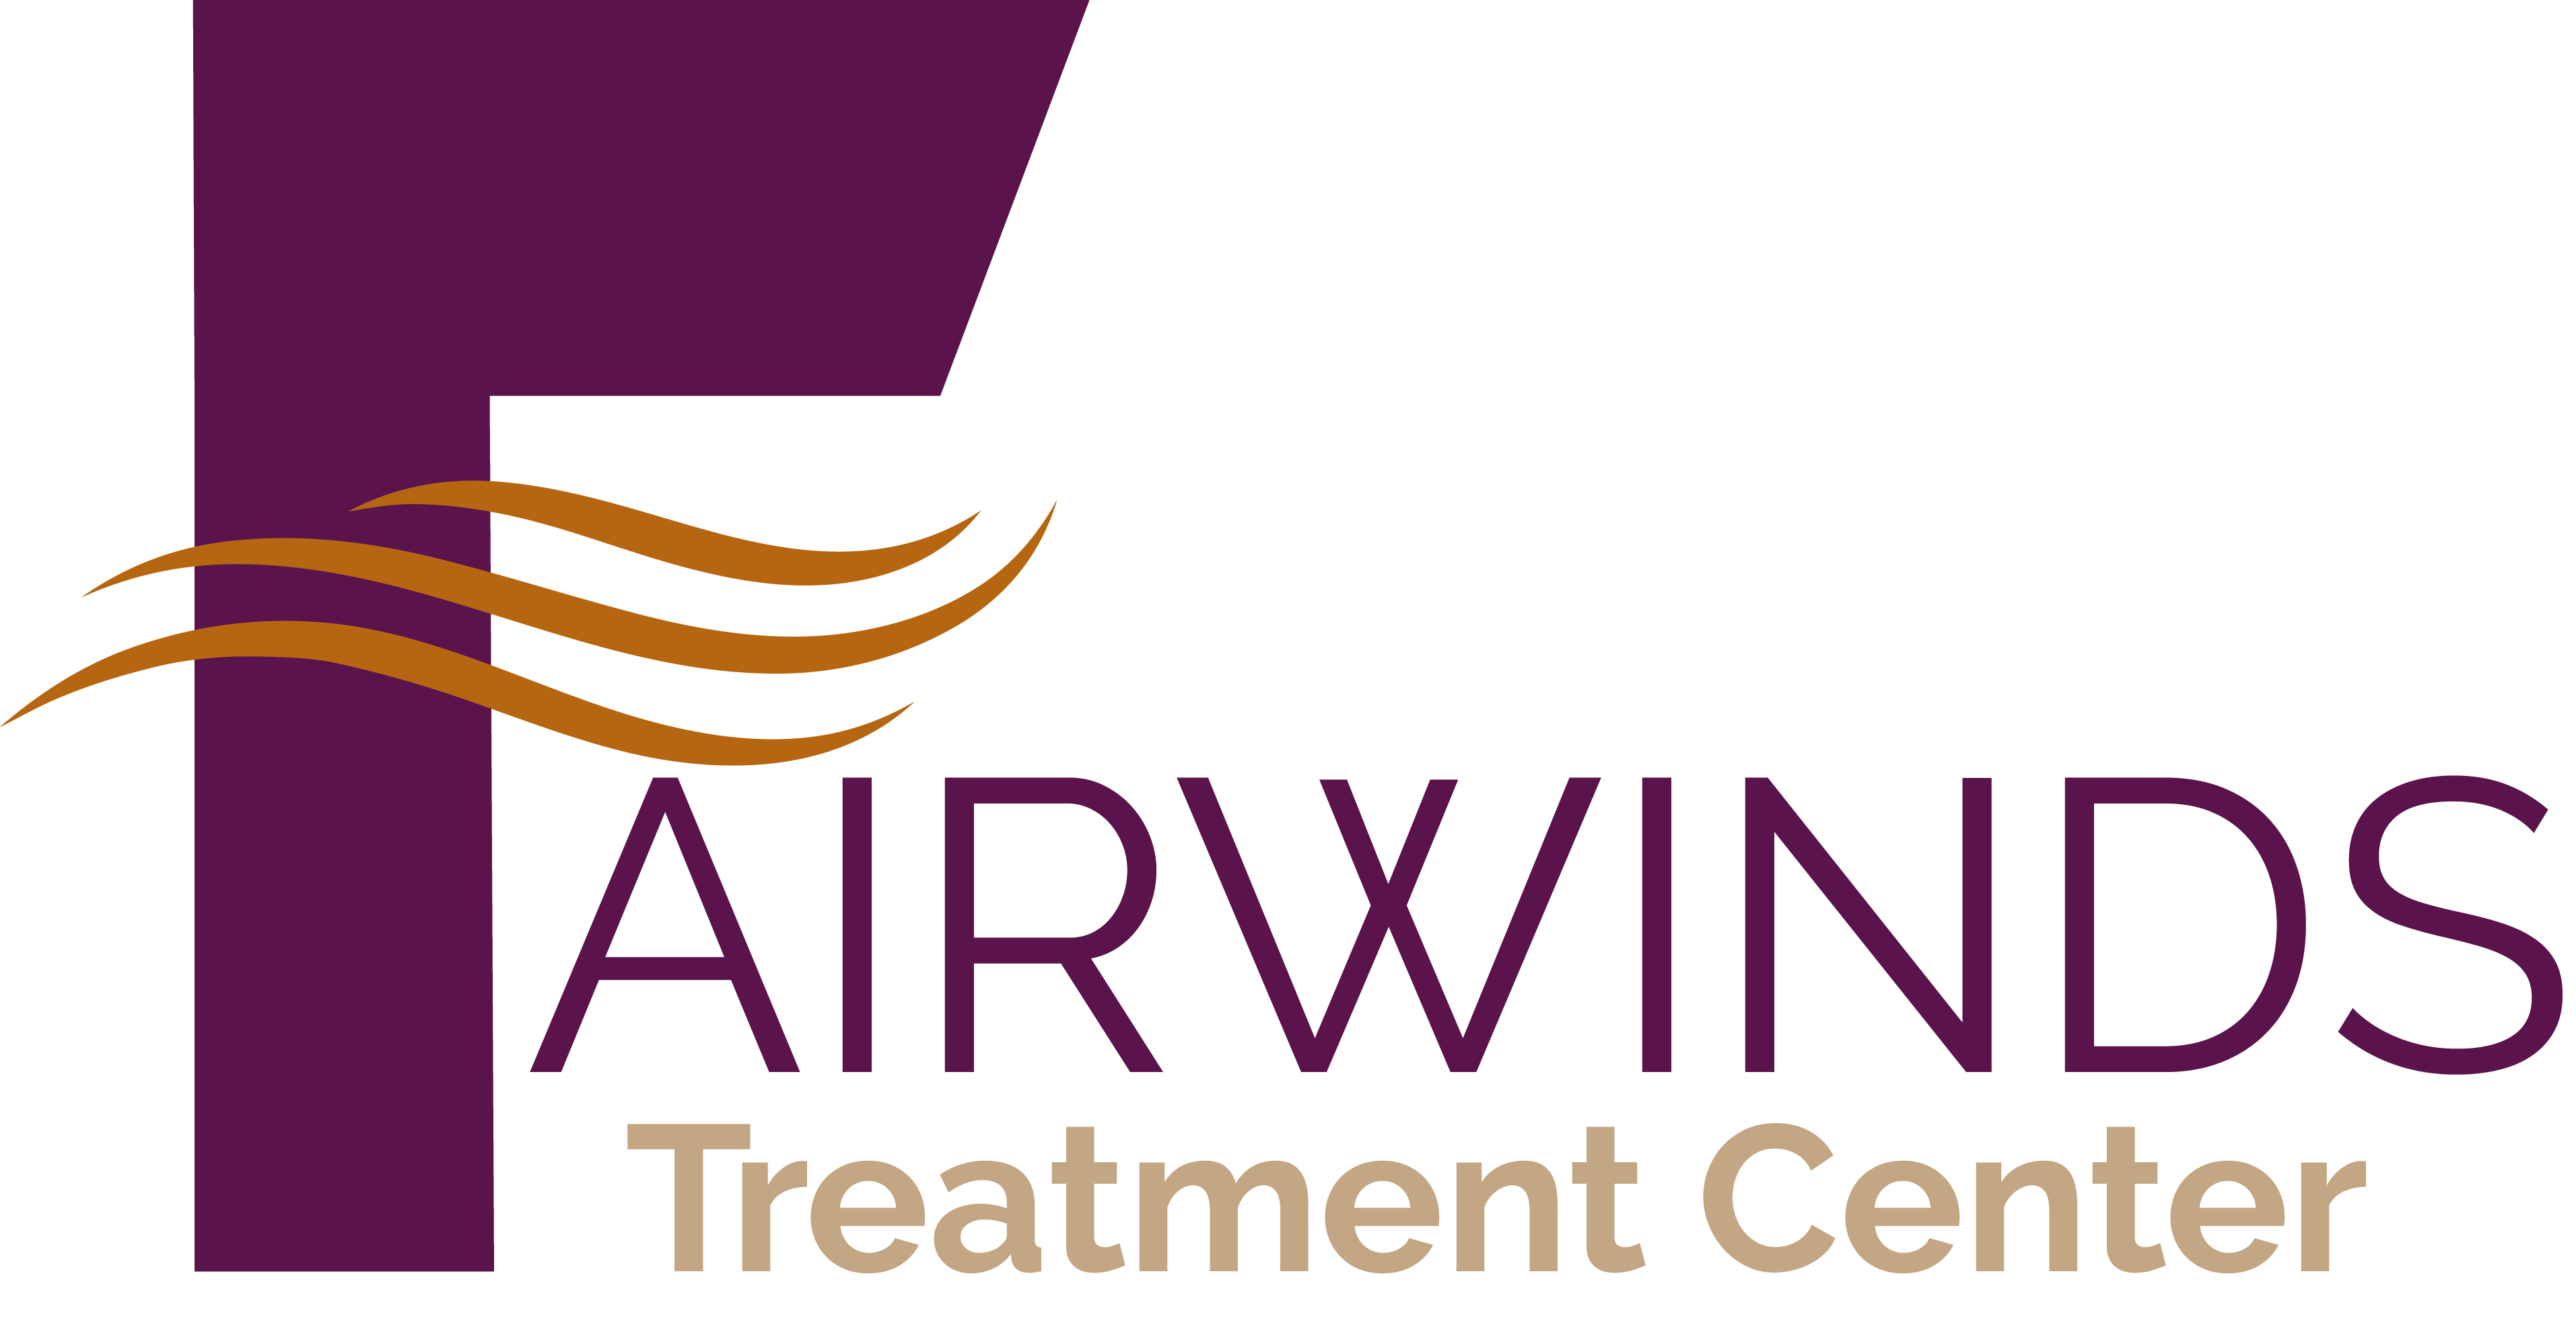 Maroon Cross and Shield Logo - Treatment Covered by Blue Cross Blue Shield - Fairwinds Treatment Center